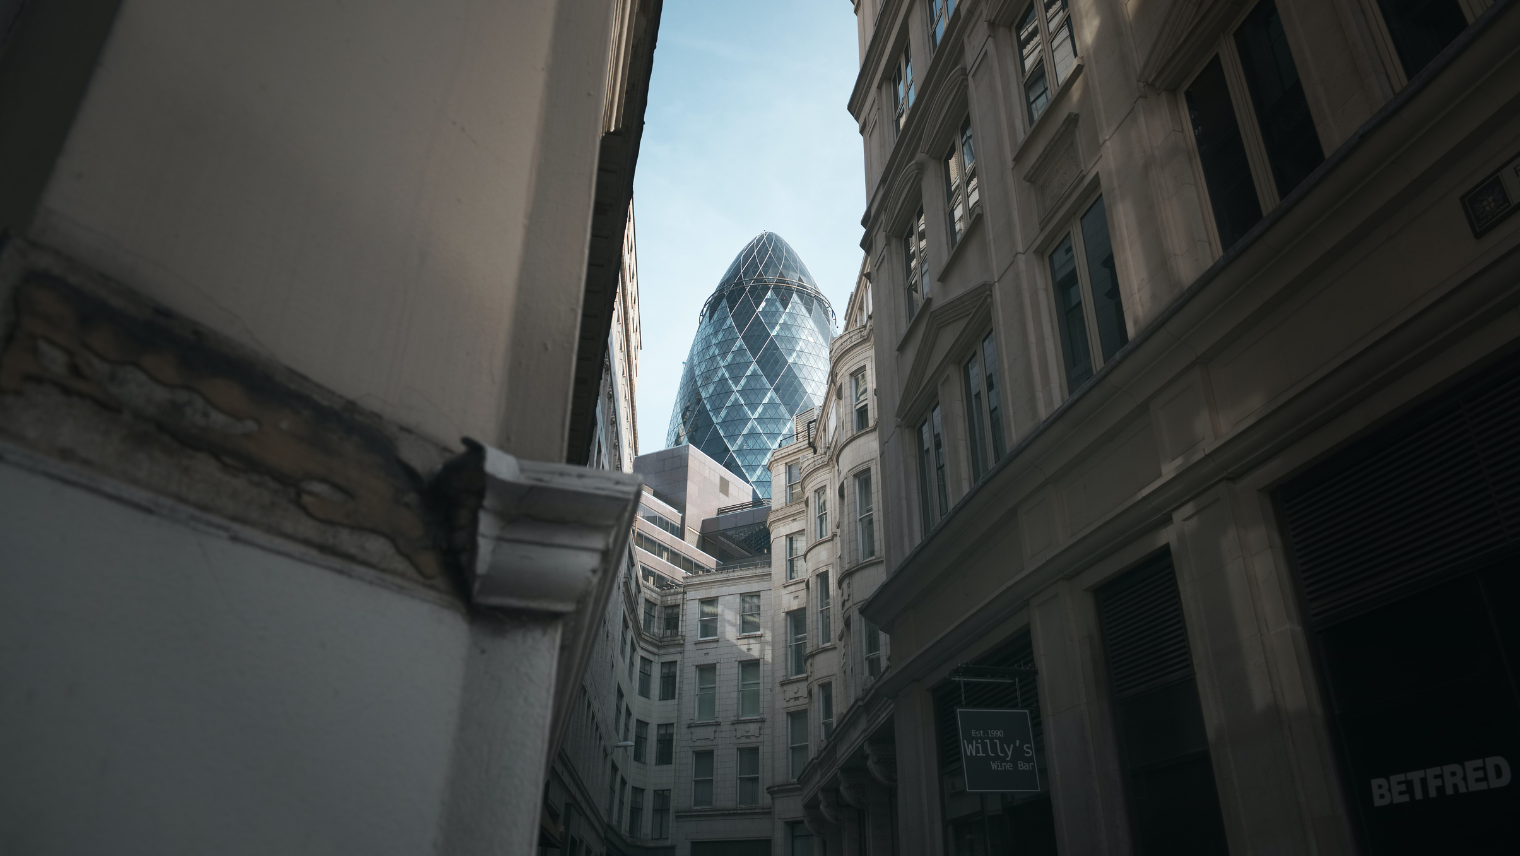 Image of the Gherkin building in London